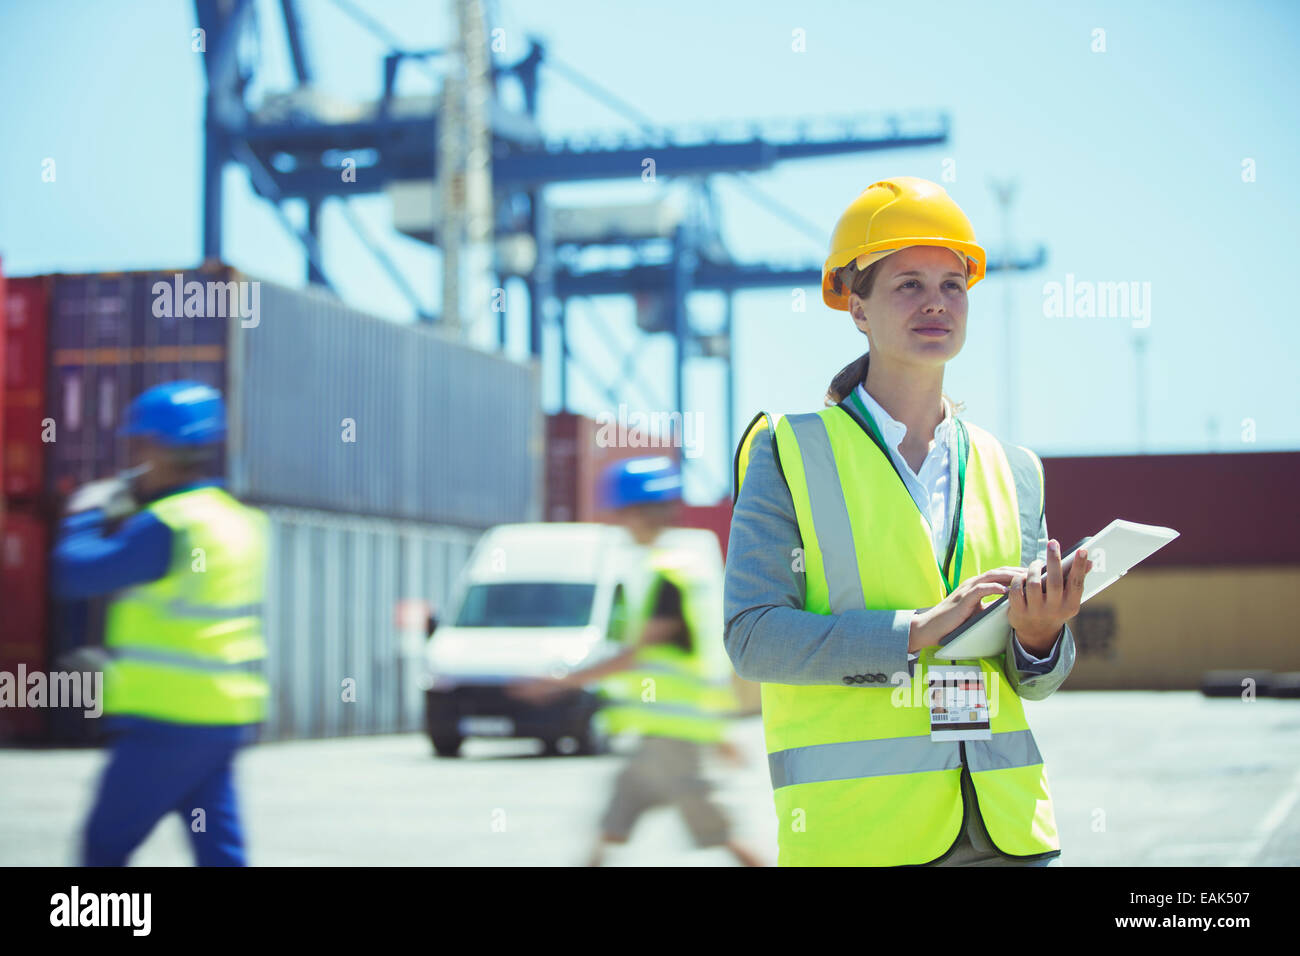 Businesswoman using digital tablet near cargo containers Stock Photo